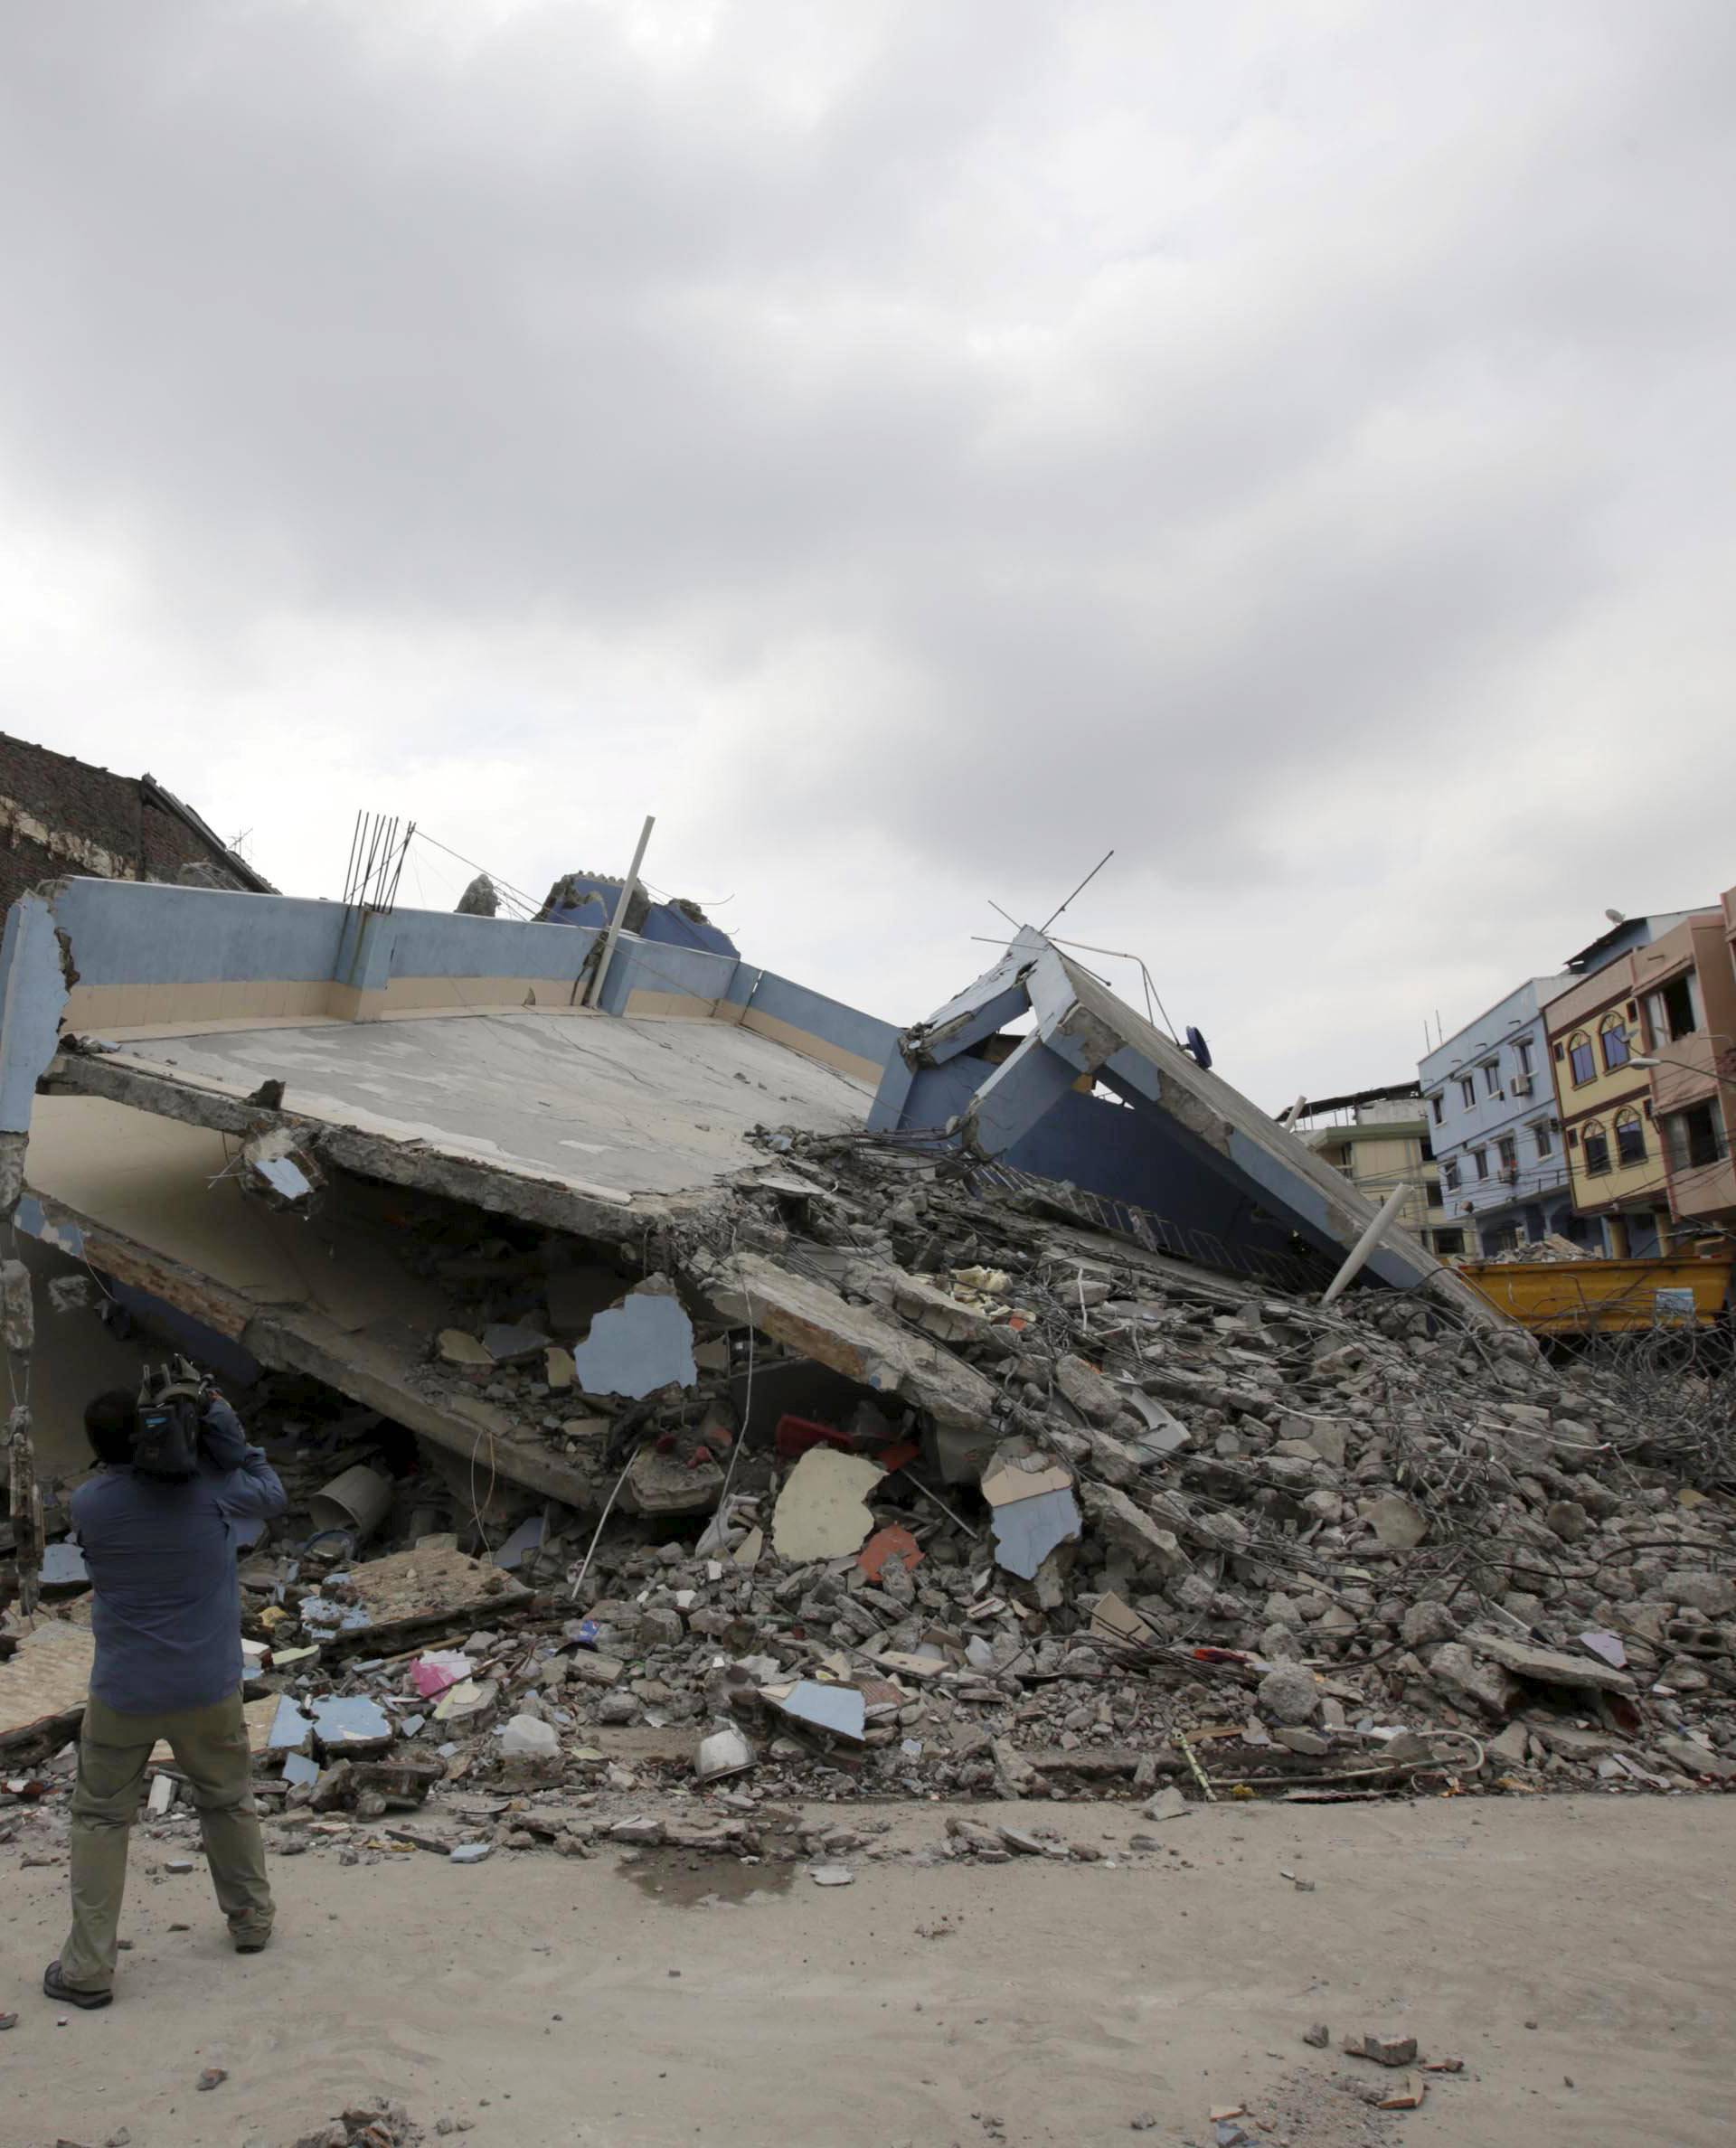 A television cameraman films a collapsed building in Guayaquil after an earthquake struck off the Pacific coast in Ecuador